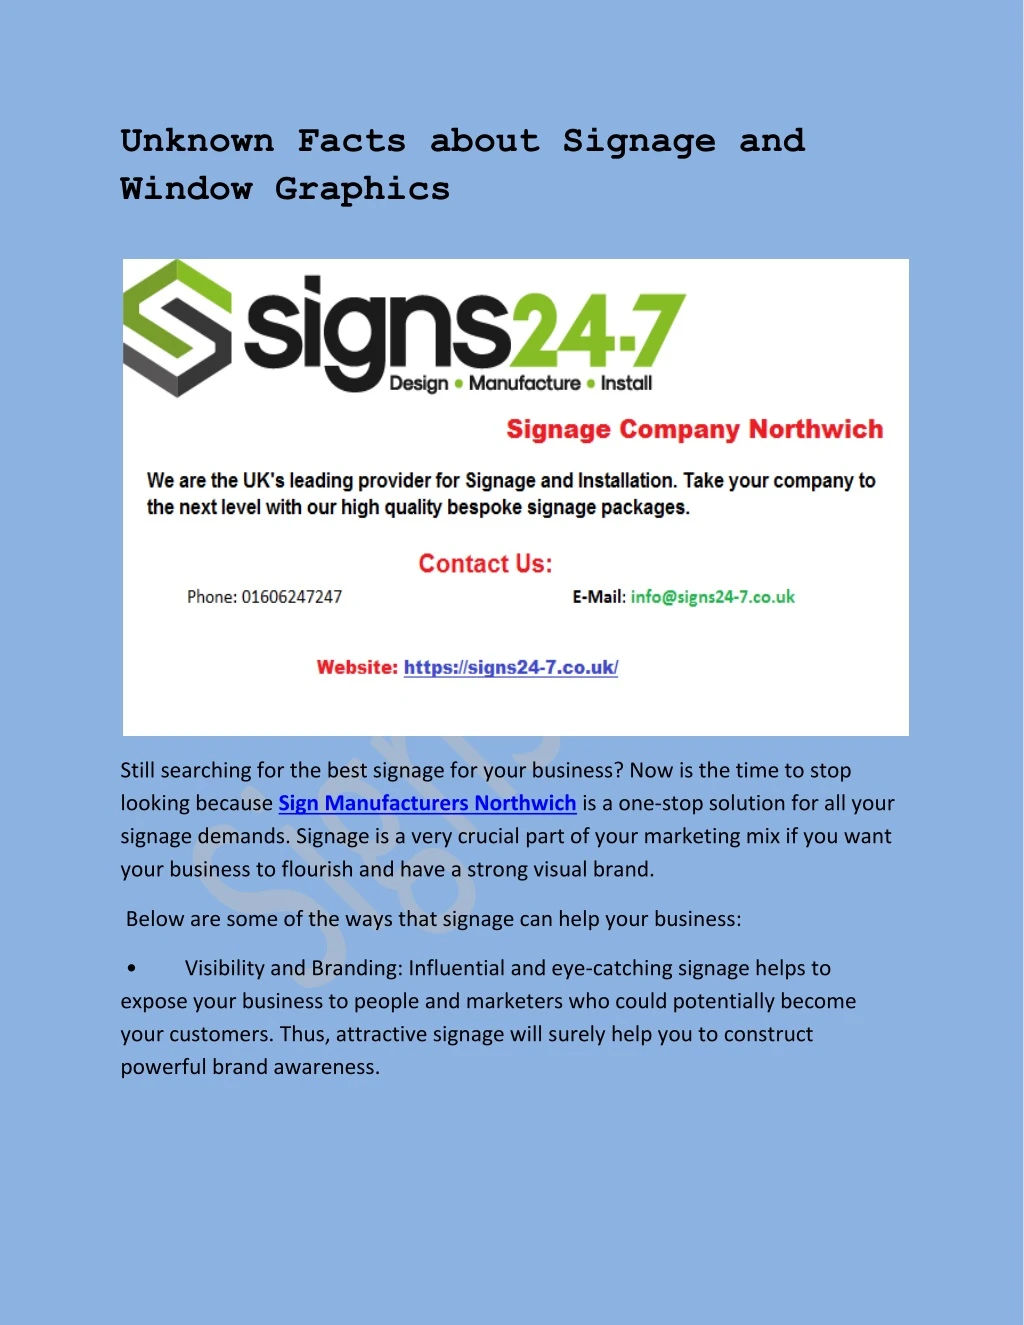 unknown facts about signage and window graphics